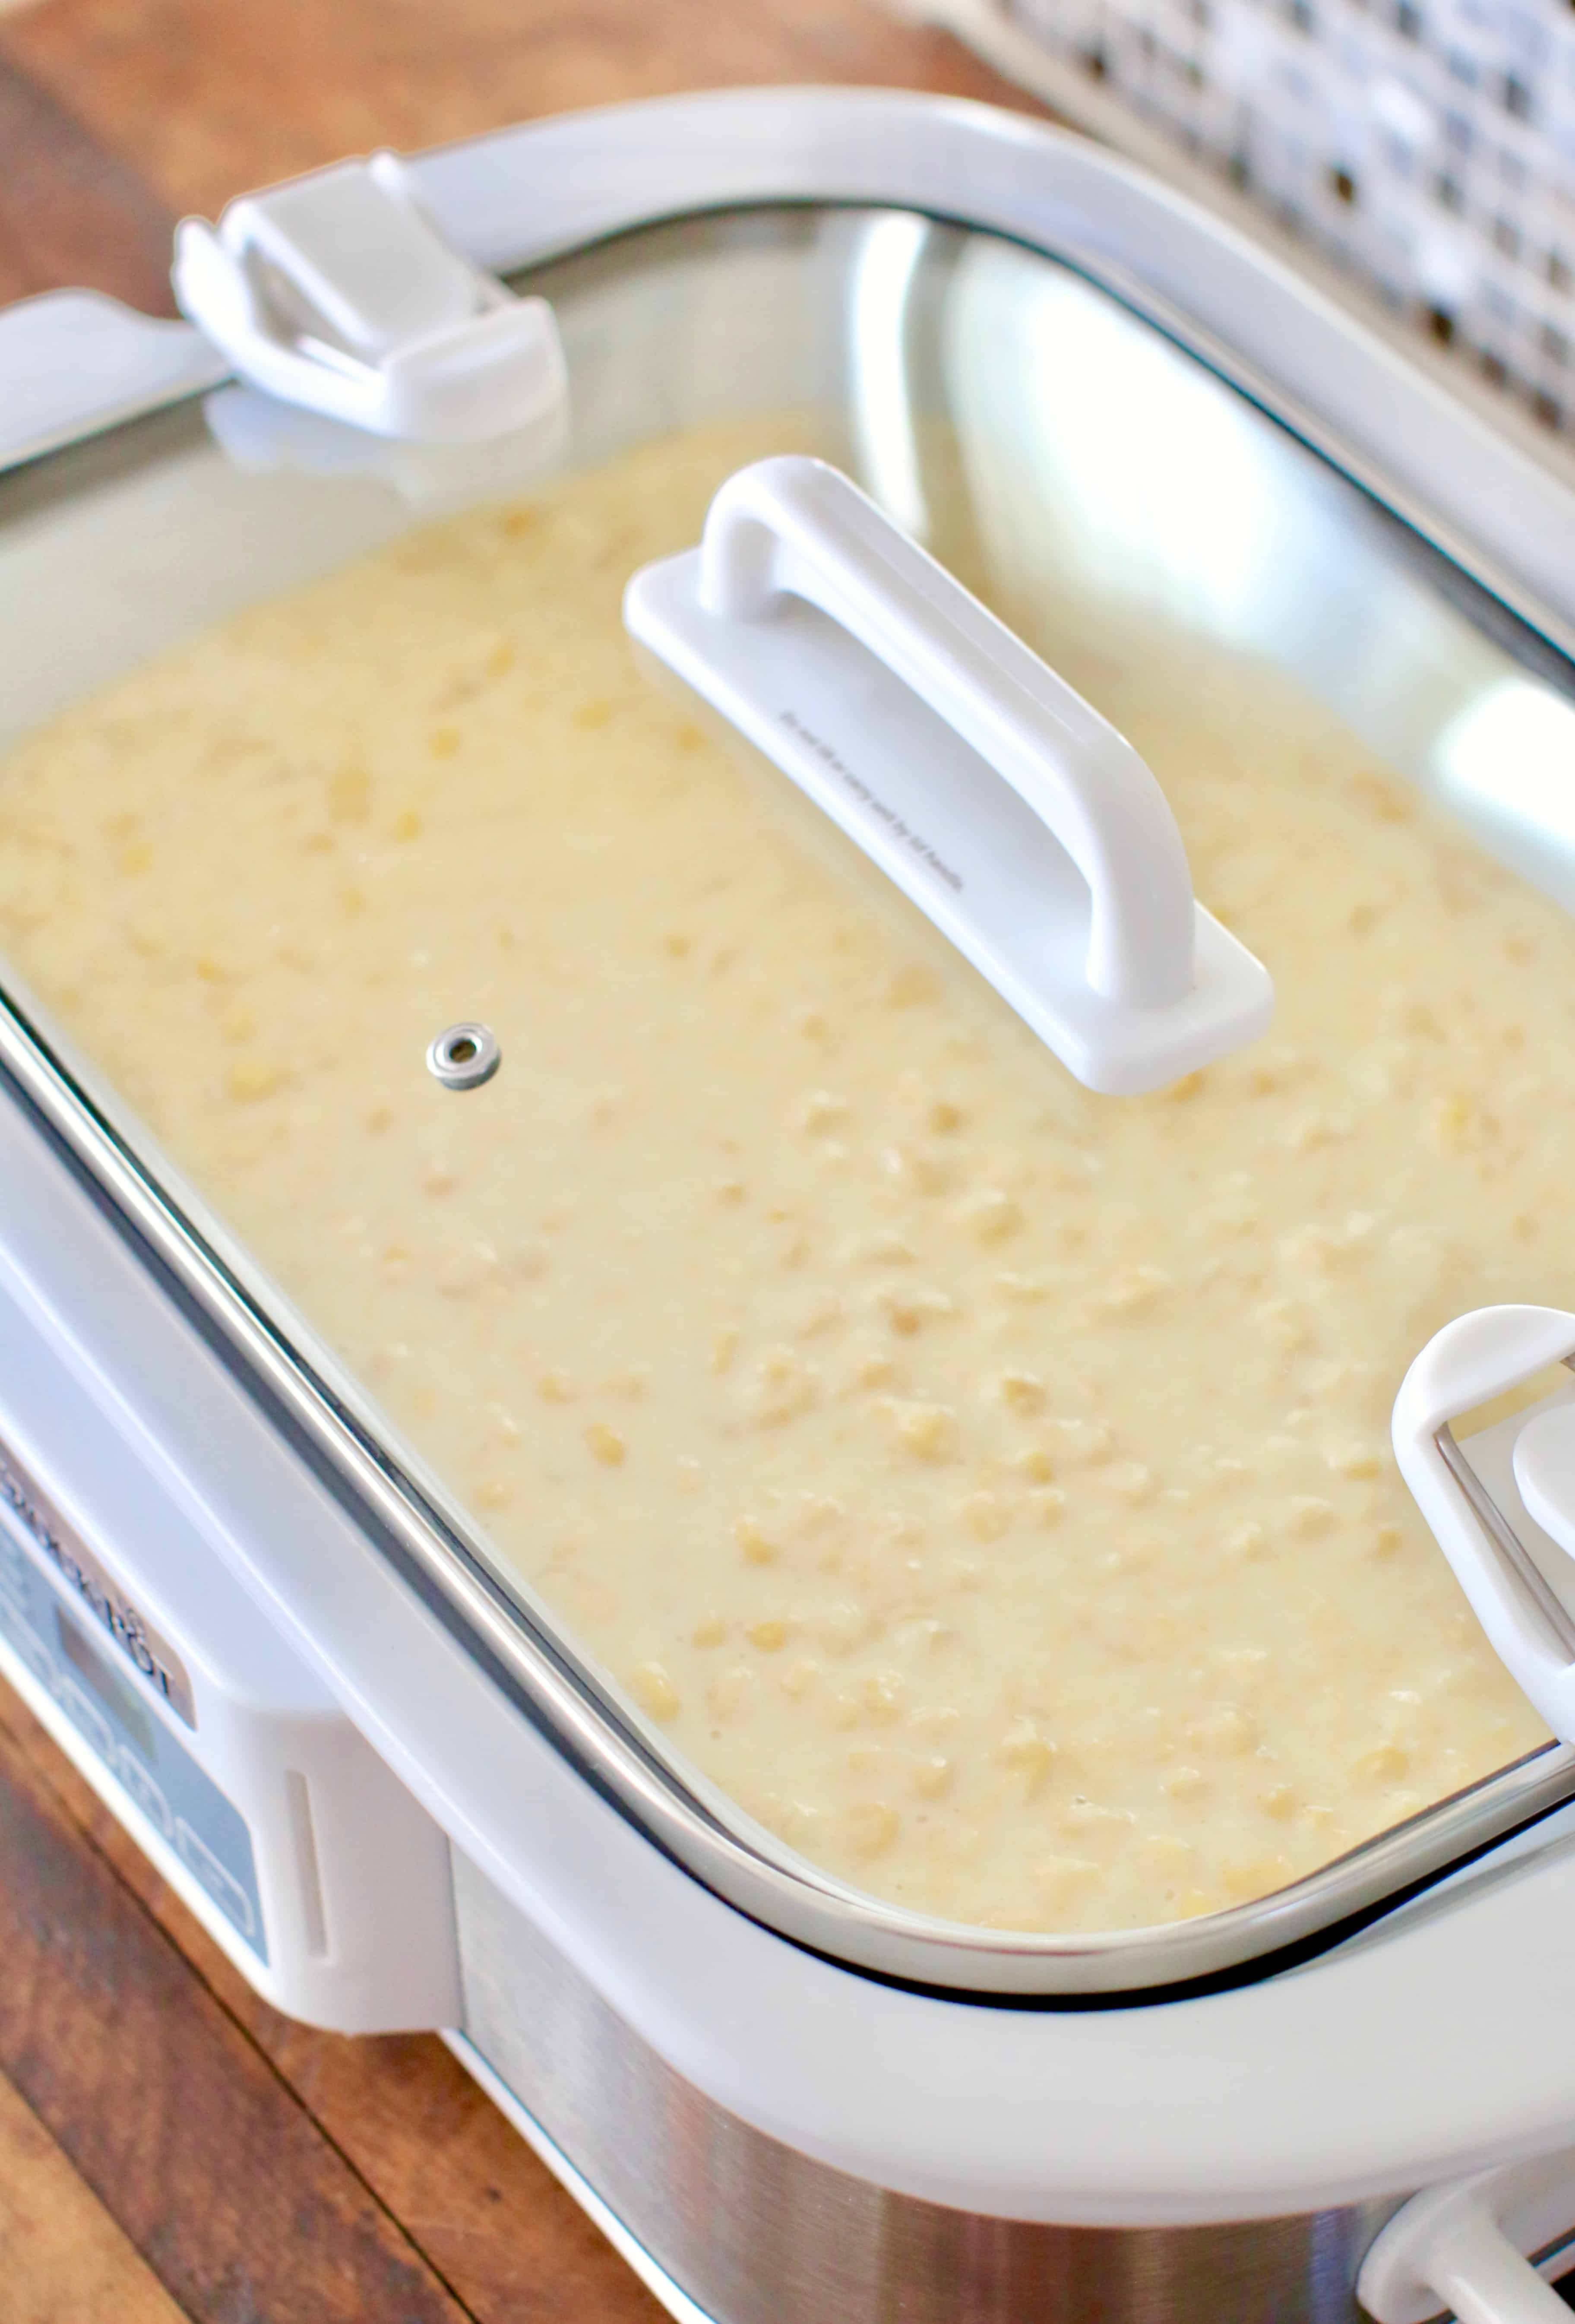 casserole crock pot pictured with corn casserole batter inside and a clear lid on top.